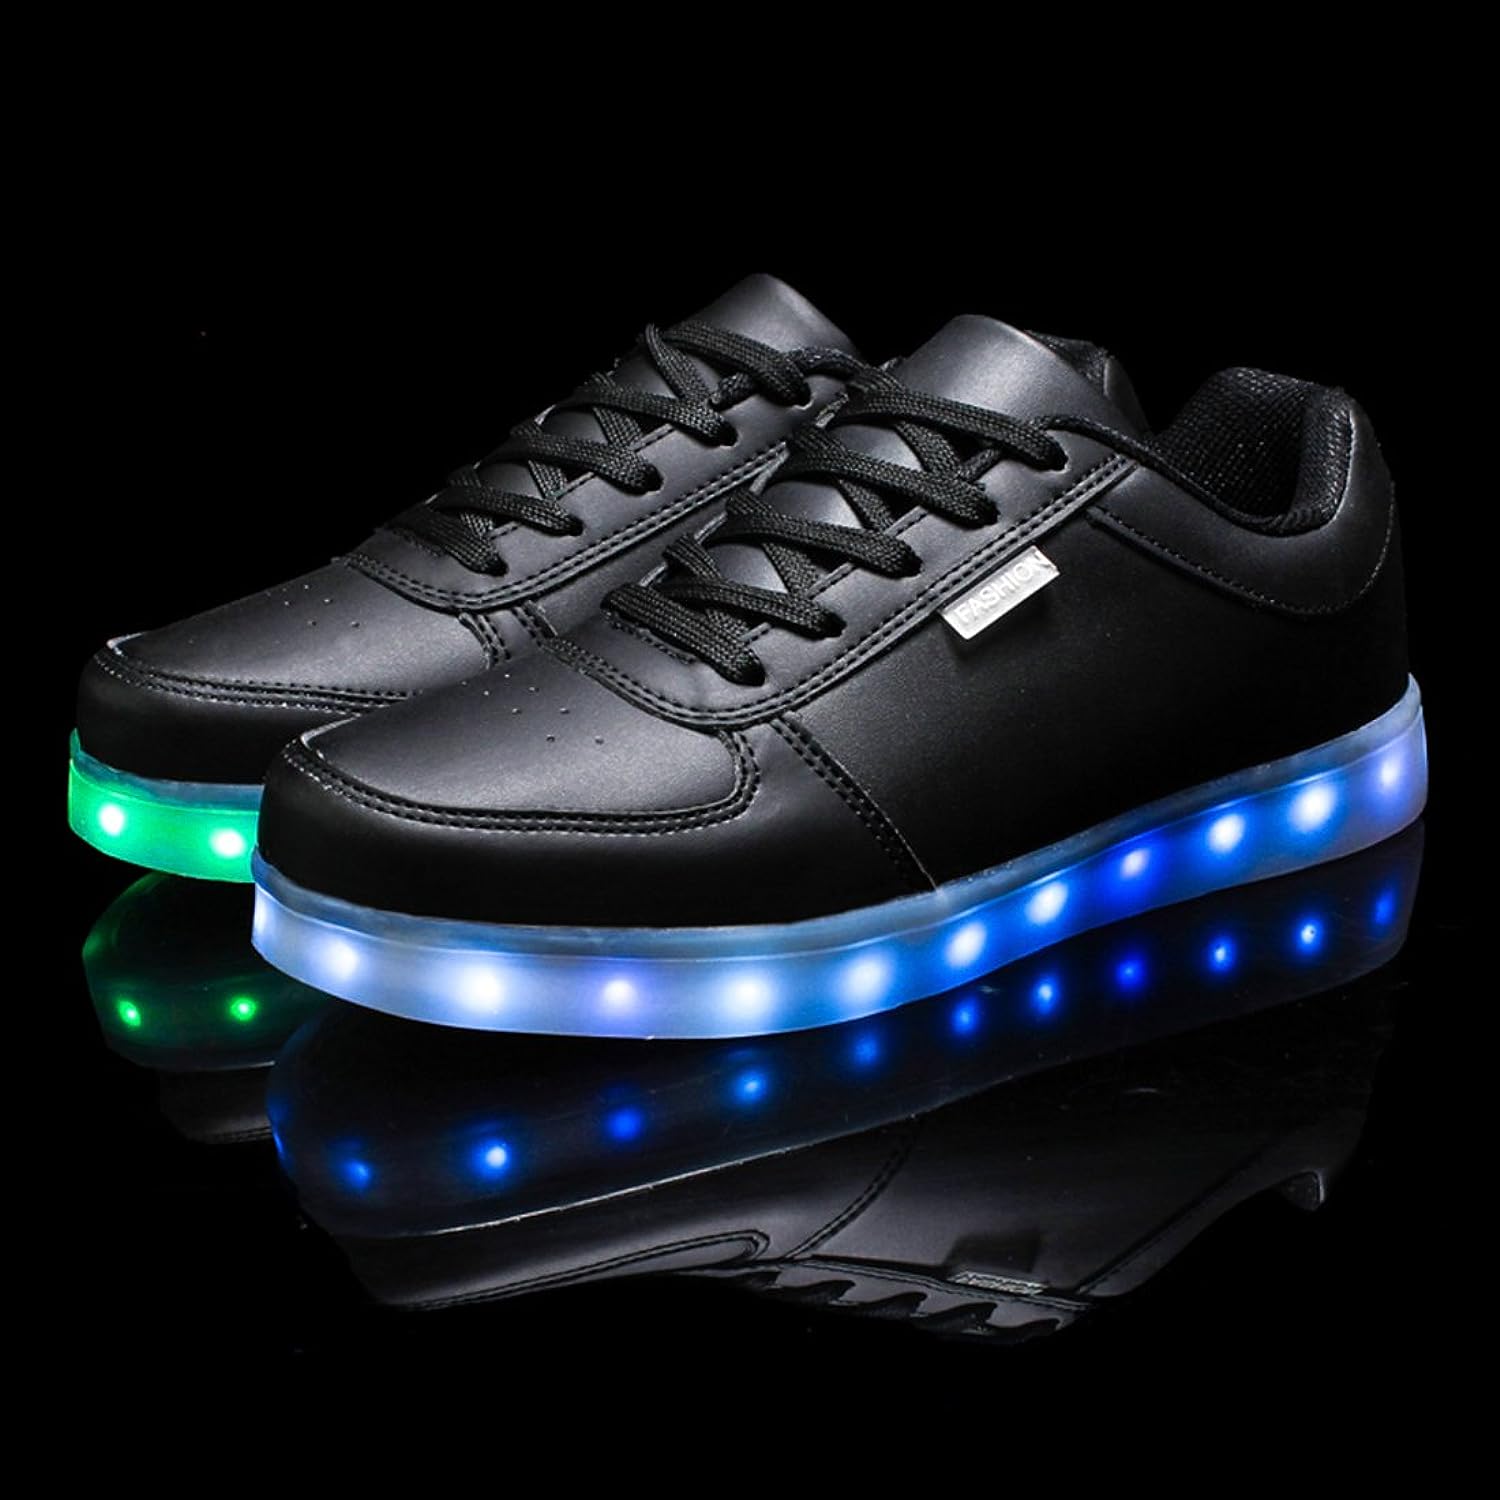 Consumer Perception and Acceptance of Light Shoes: A Market Research Study